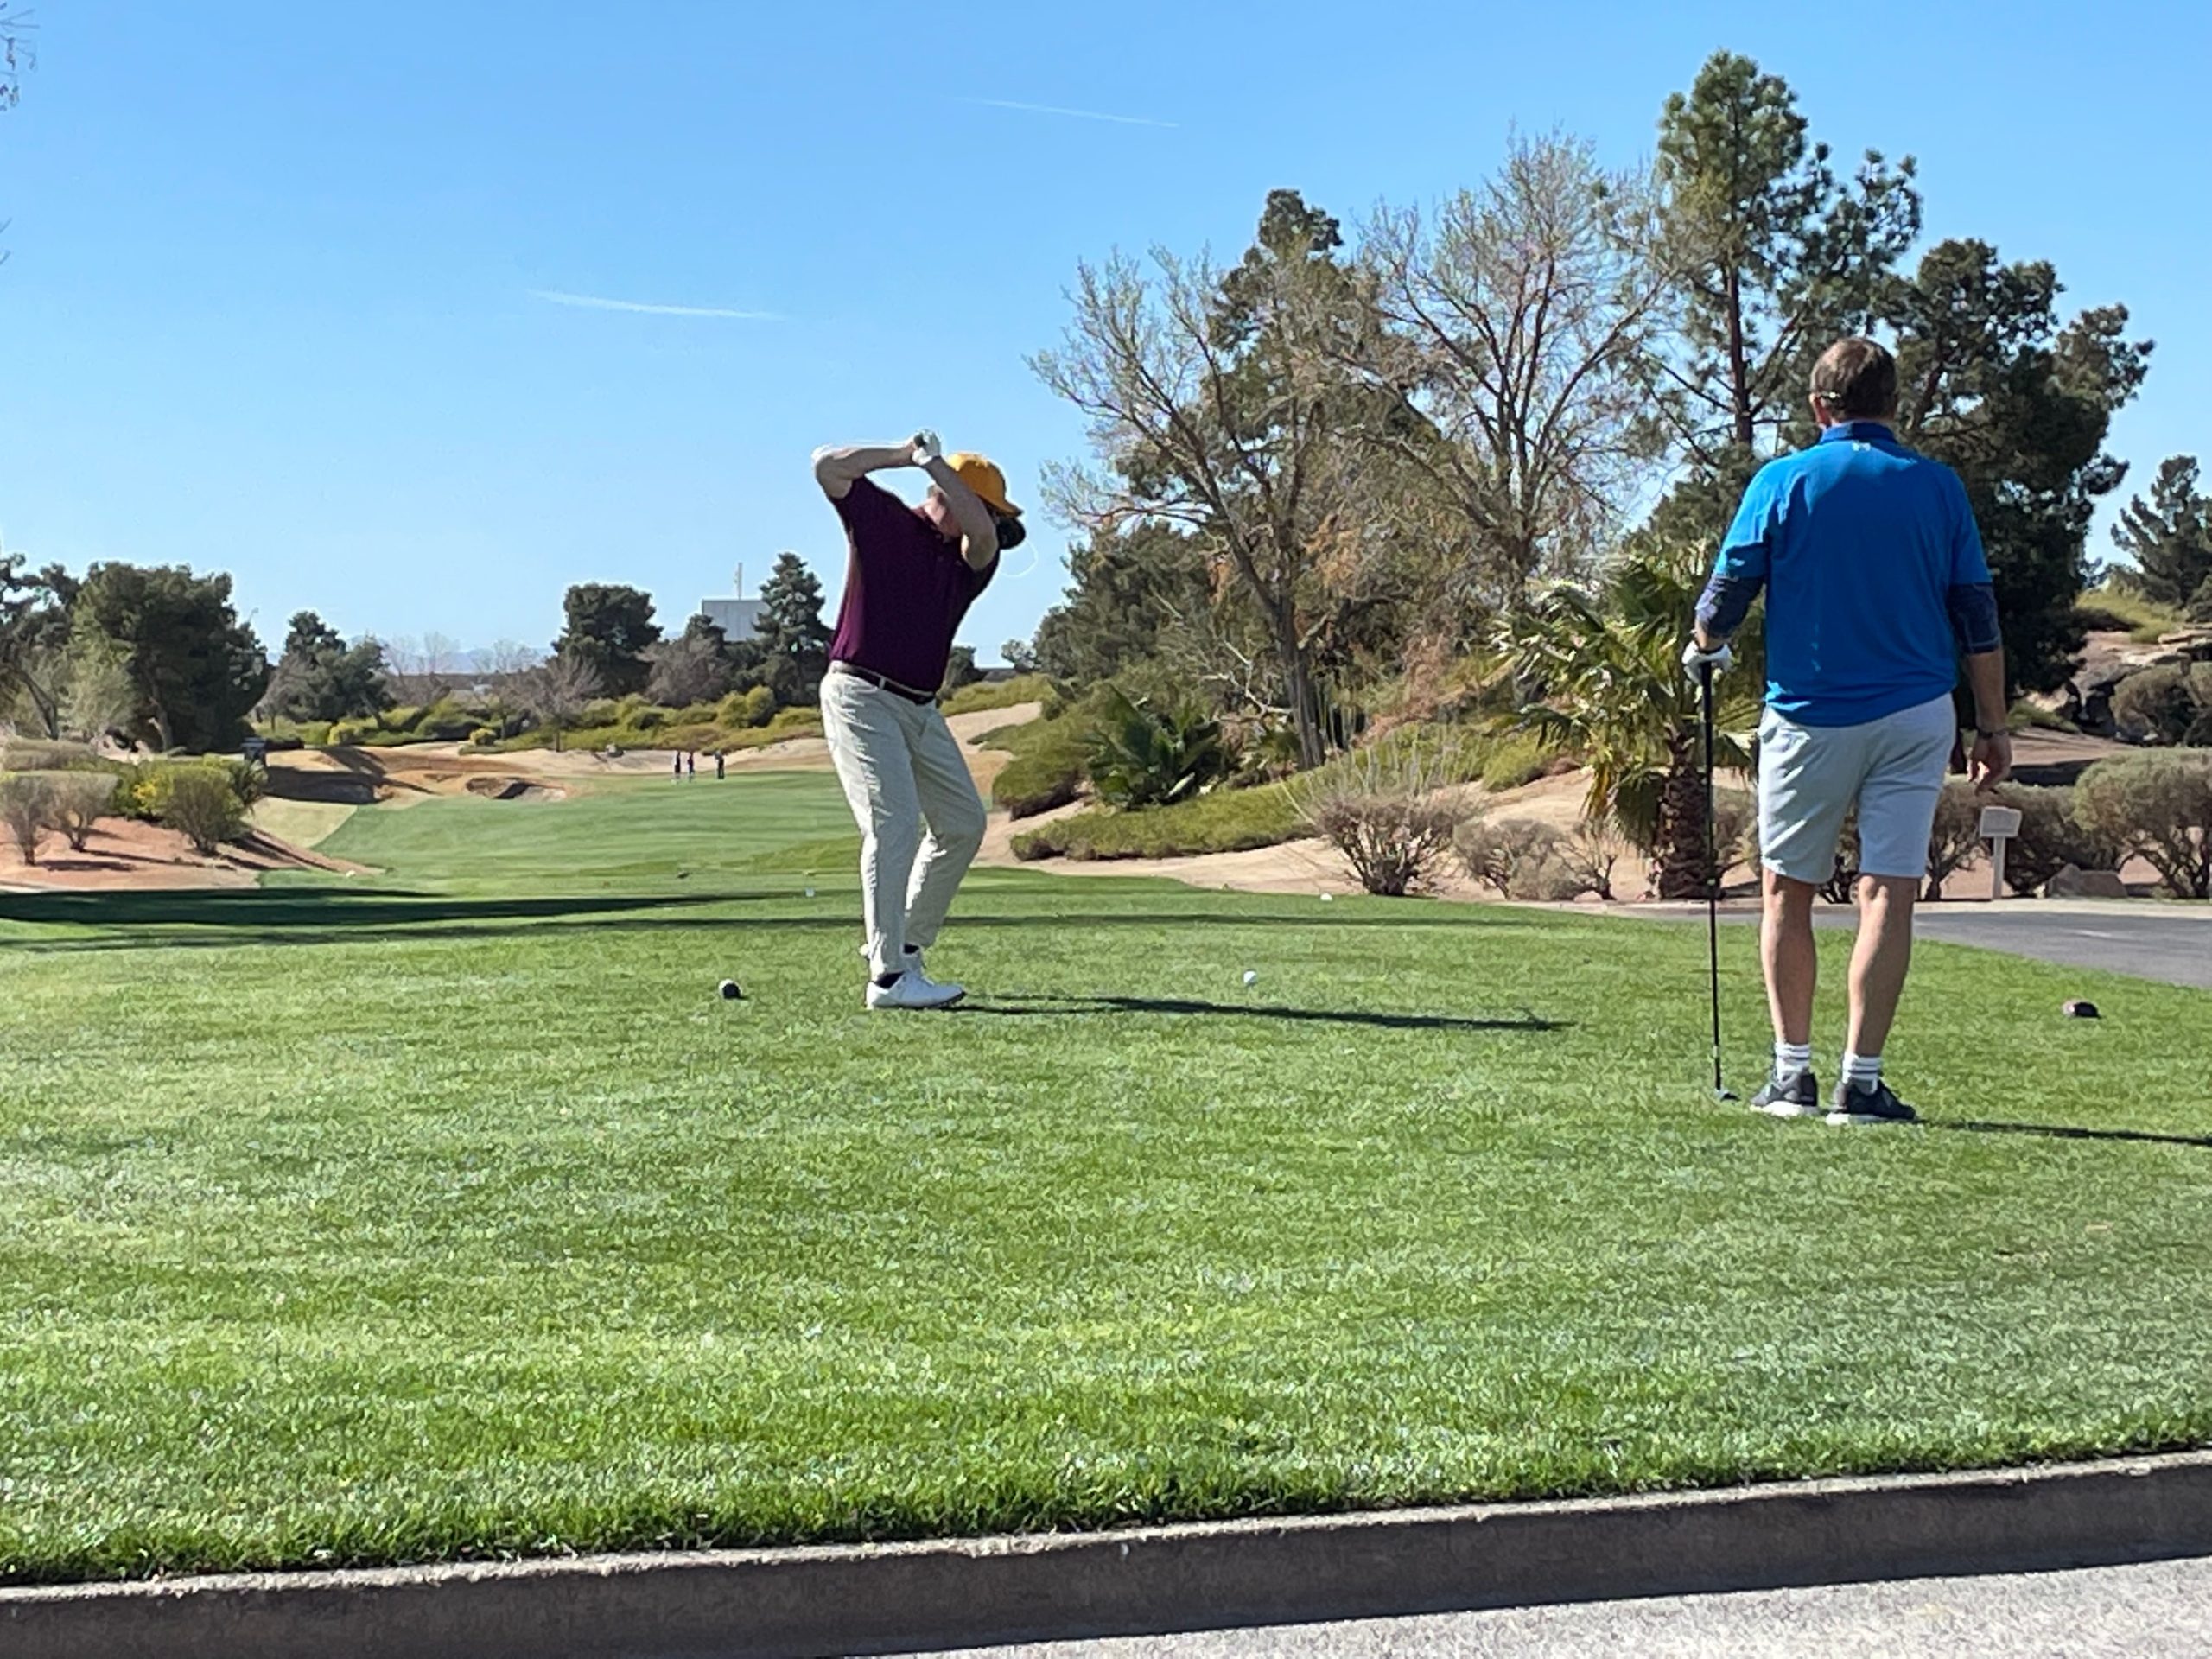 Security & Life Safety Leaders Compete, Network & Support the Industry Workforce at the FAST Golf Classic